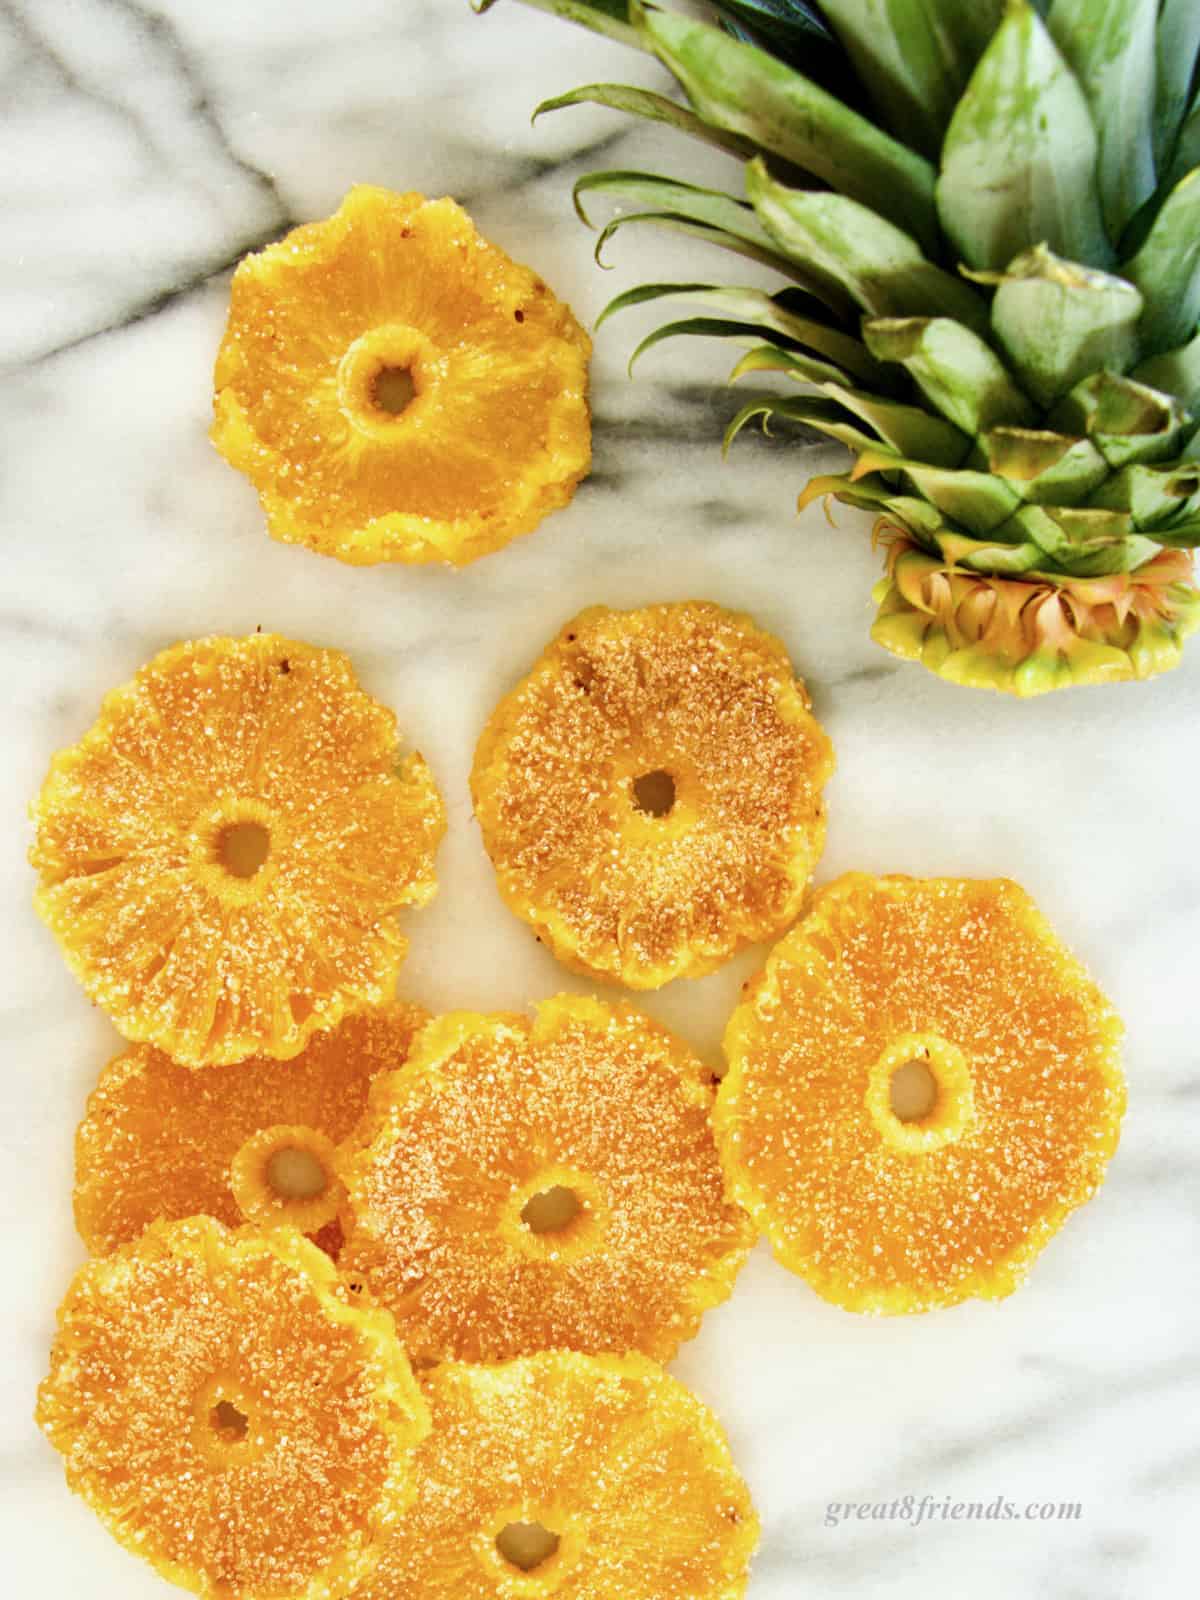 Candied pineapple slices laying on marble.